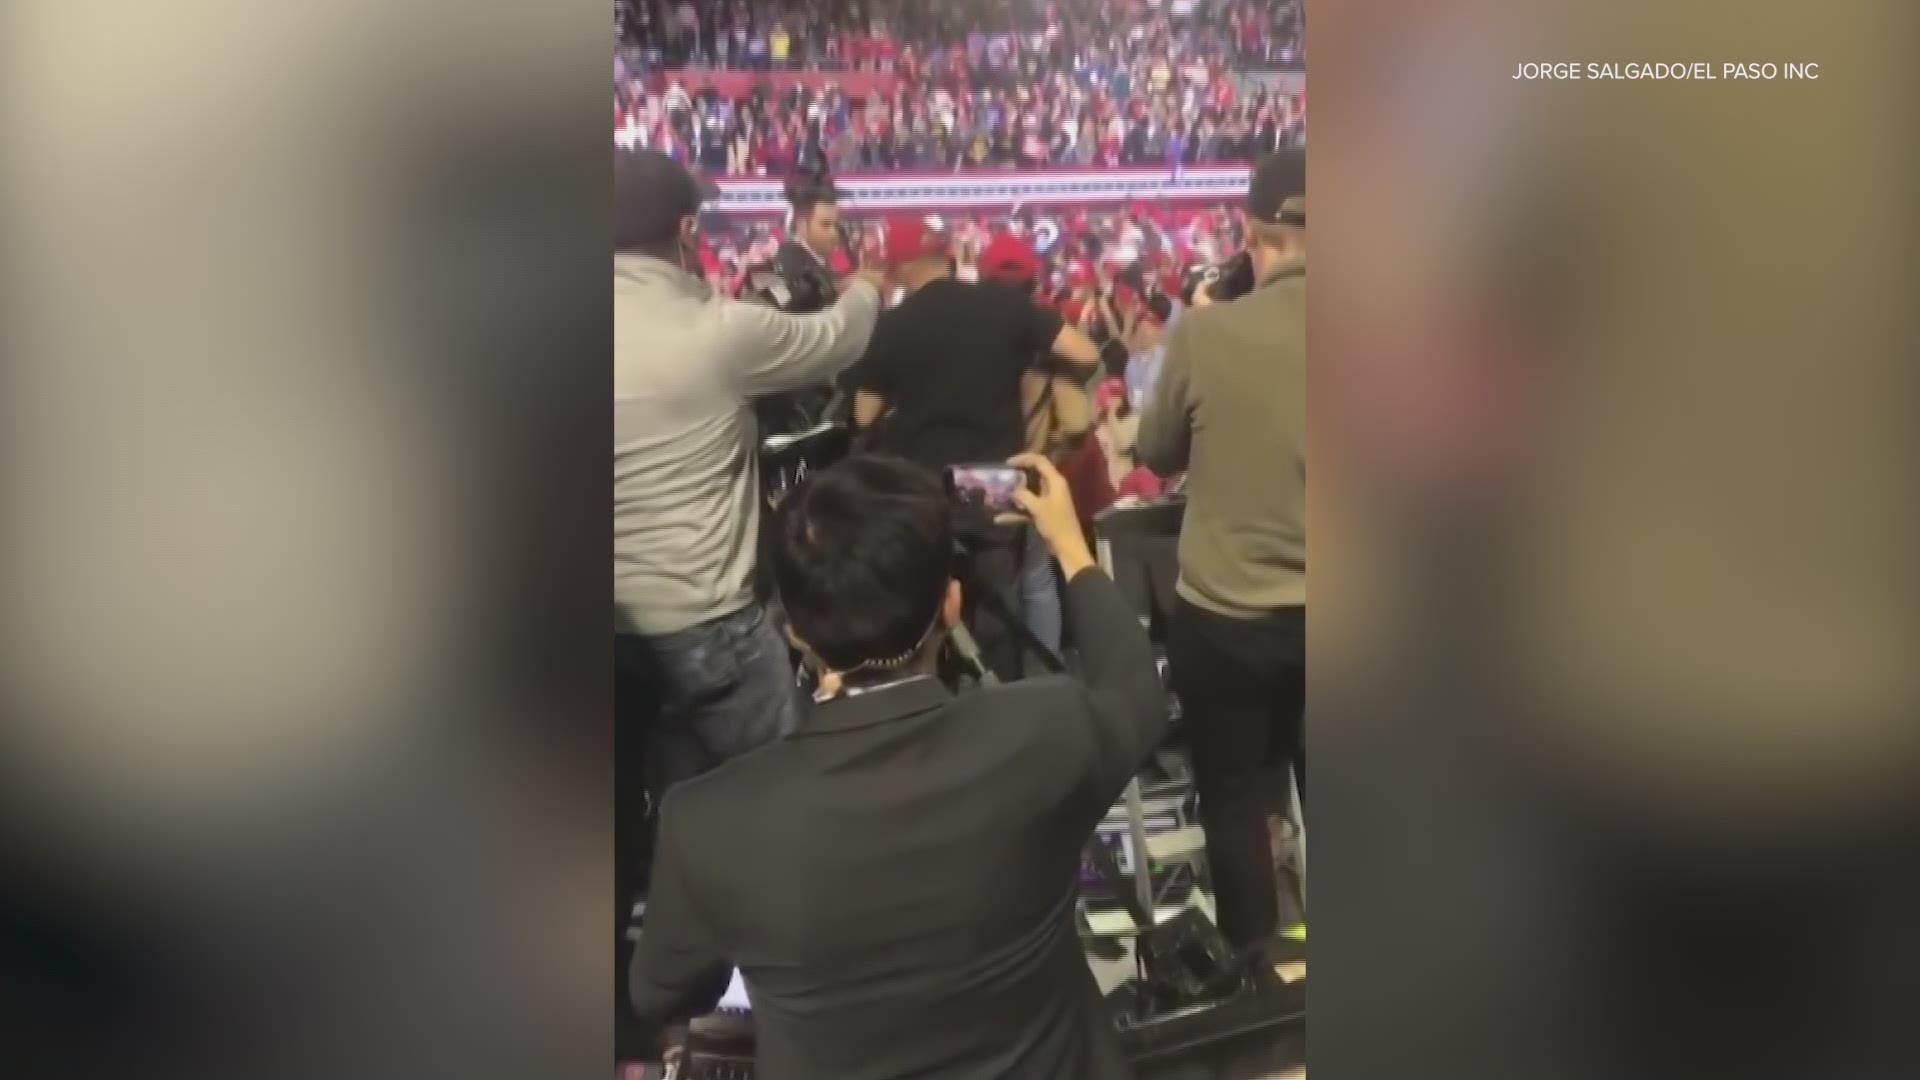 Video shows the moments after a BBC cameraman was shoved during a speech by President Donald Trump in Texas on Monday evening. (Jorge Salgado/El Paso Inc. via AP)